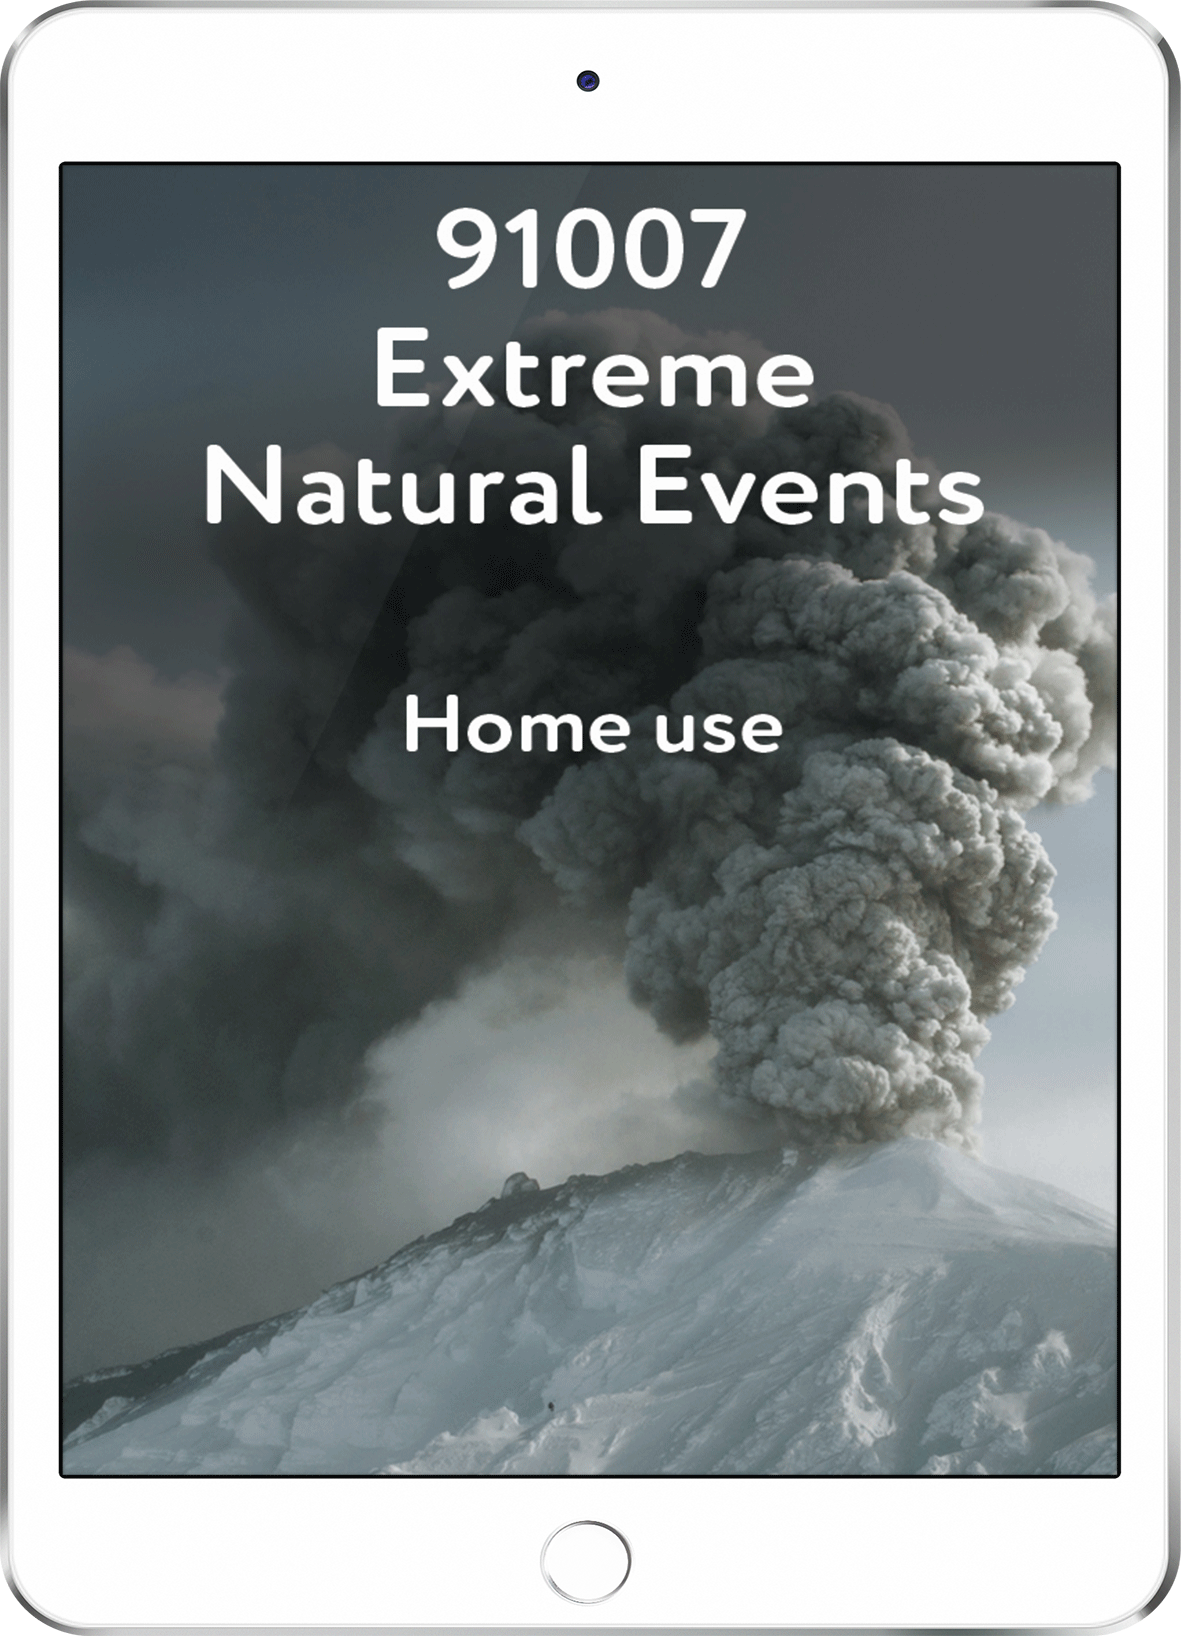 91007 Extreme Natural Events - Home Use